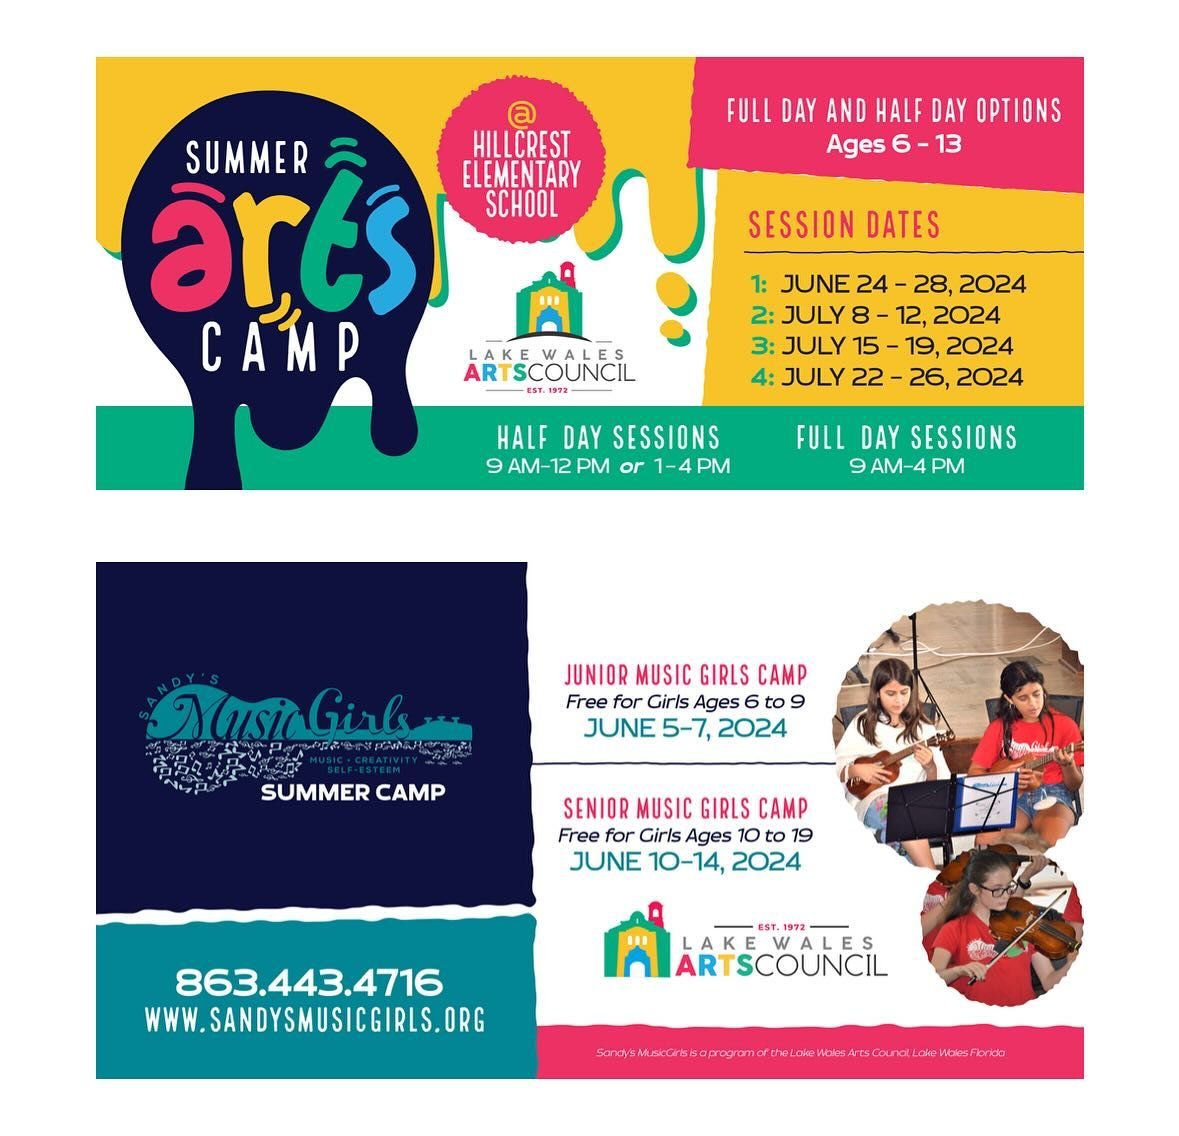 🎨🎶 Calling all parents and grandparents! ☀️ Don&rsquo;t miss out on the opportunity to spark creativity and inspire young minds this summer at the @lakewalesartscouncil Summer Arts and MusicGirls Camps! 🌟

Spaces are filling up quickly for Arts Ca